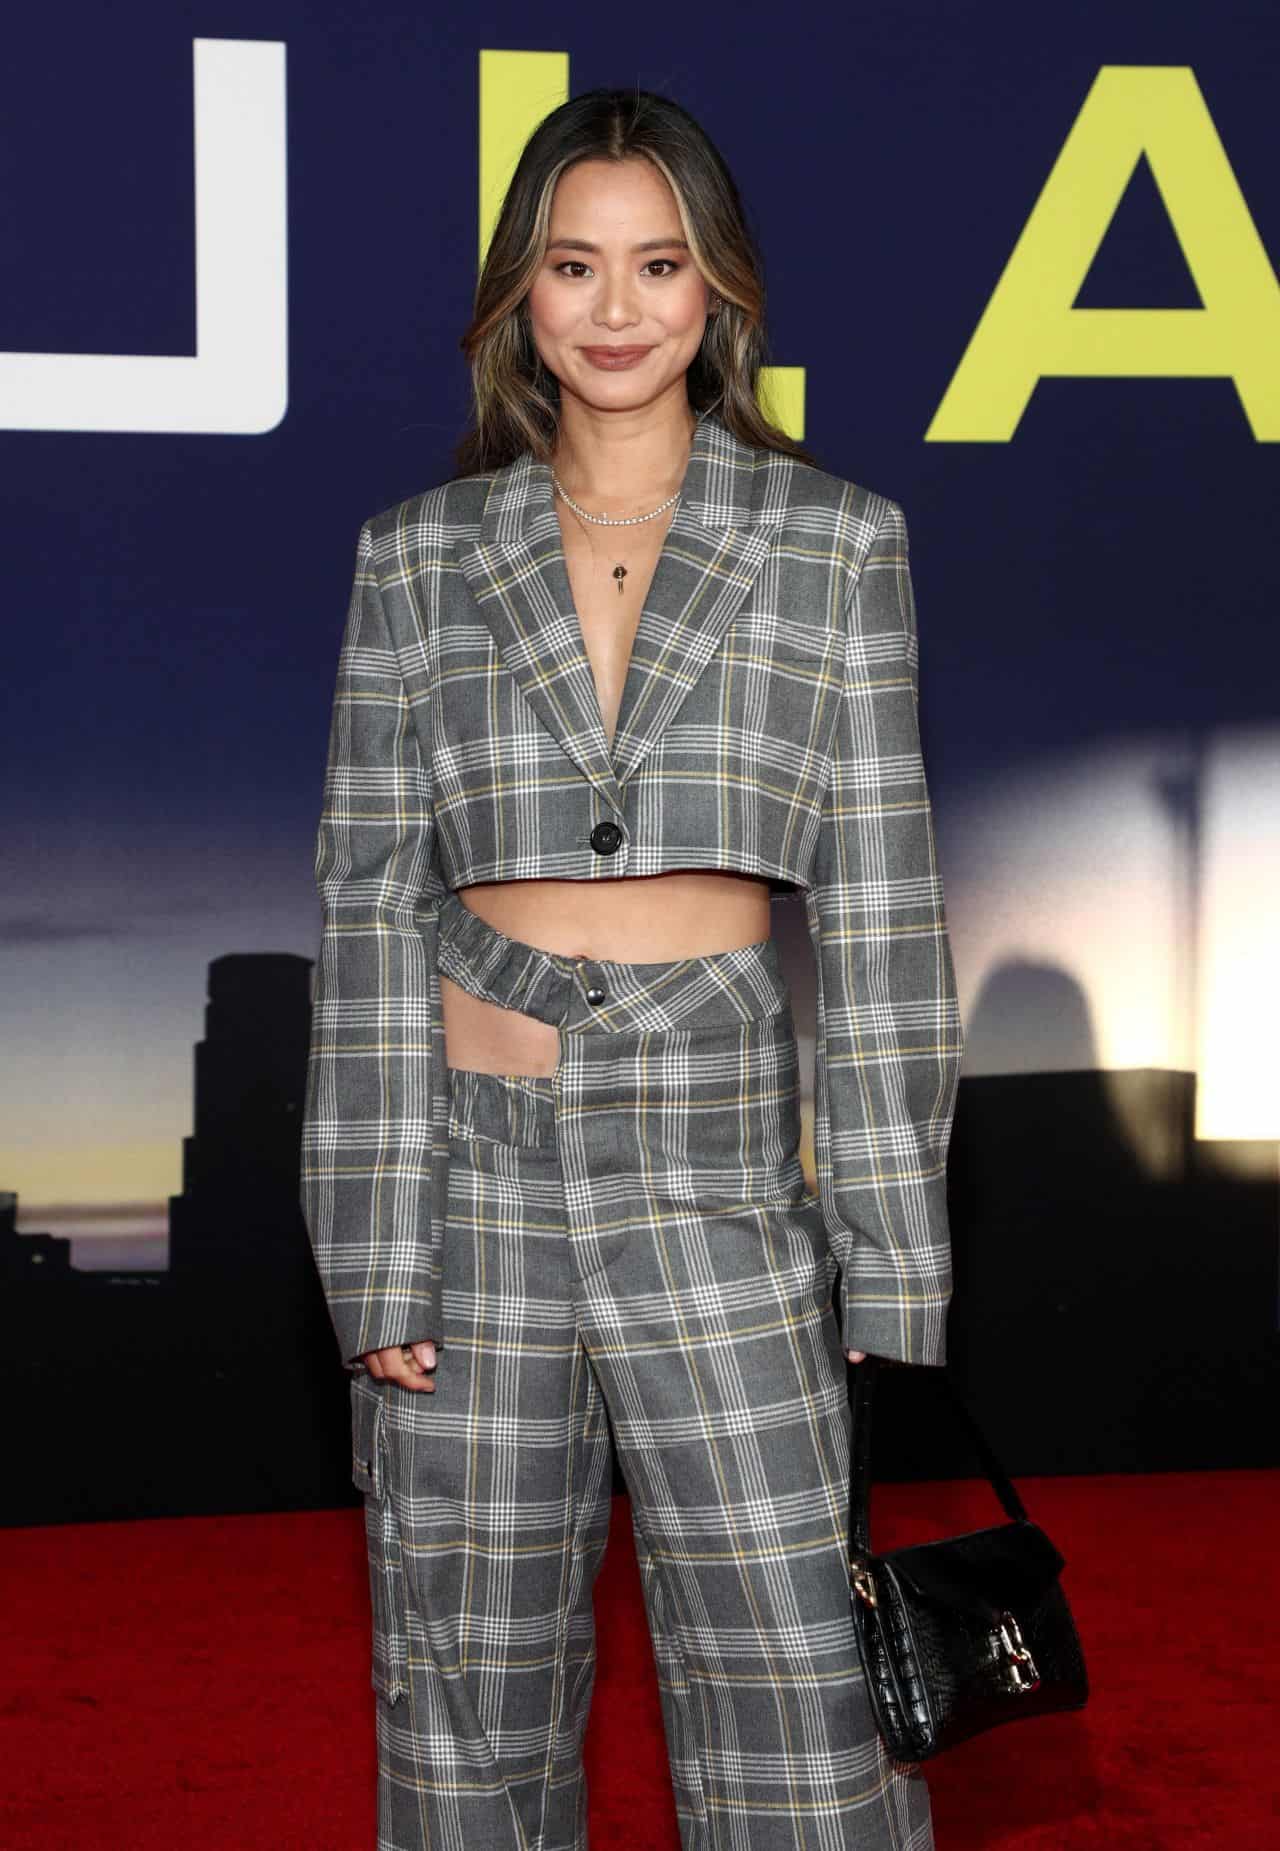 Jamie Chung Wears Cut-out Plaid Pants at the Premiere of Ambulance in LA